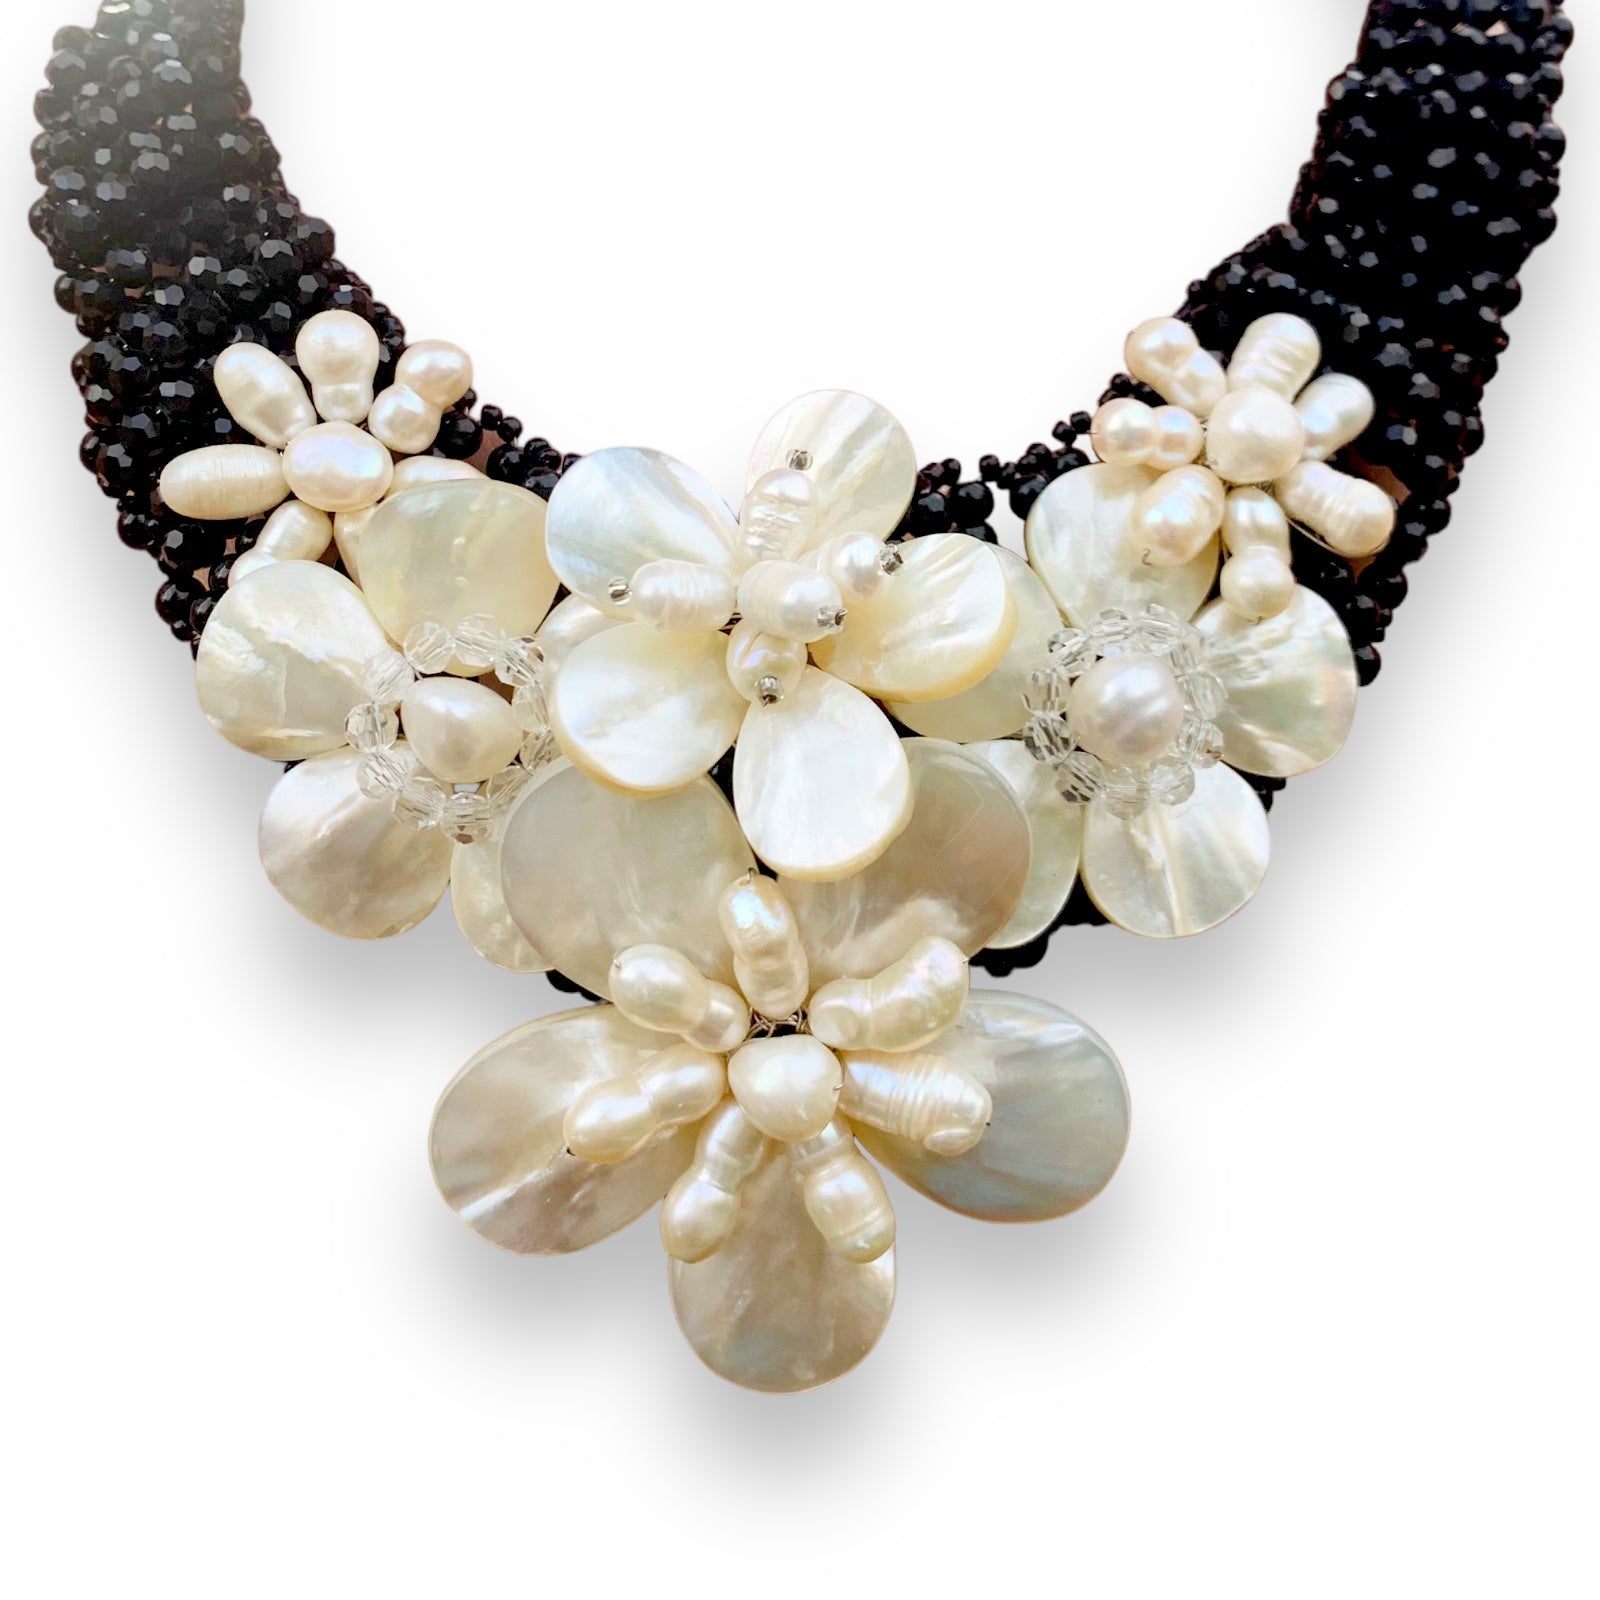 Handmade Luxury Necklace 20" Mother of Pearl Shells Cascading in Black Onyx Beads Choker